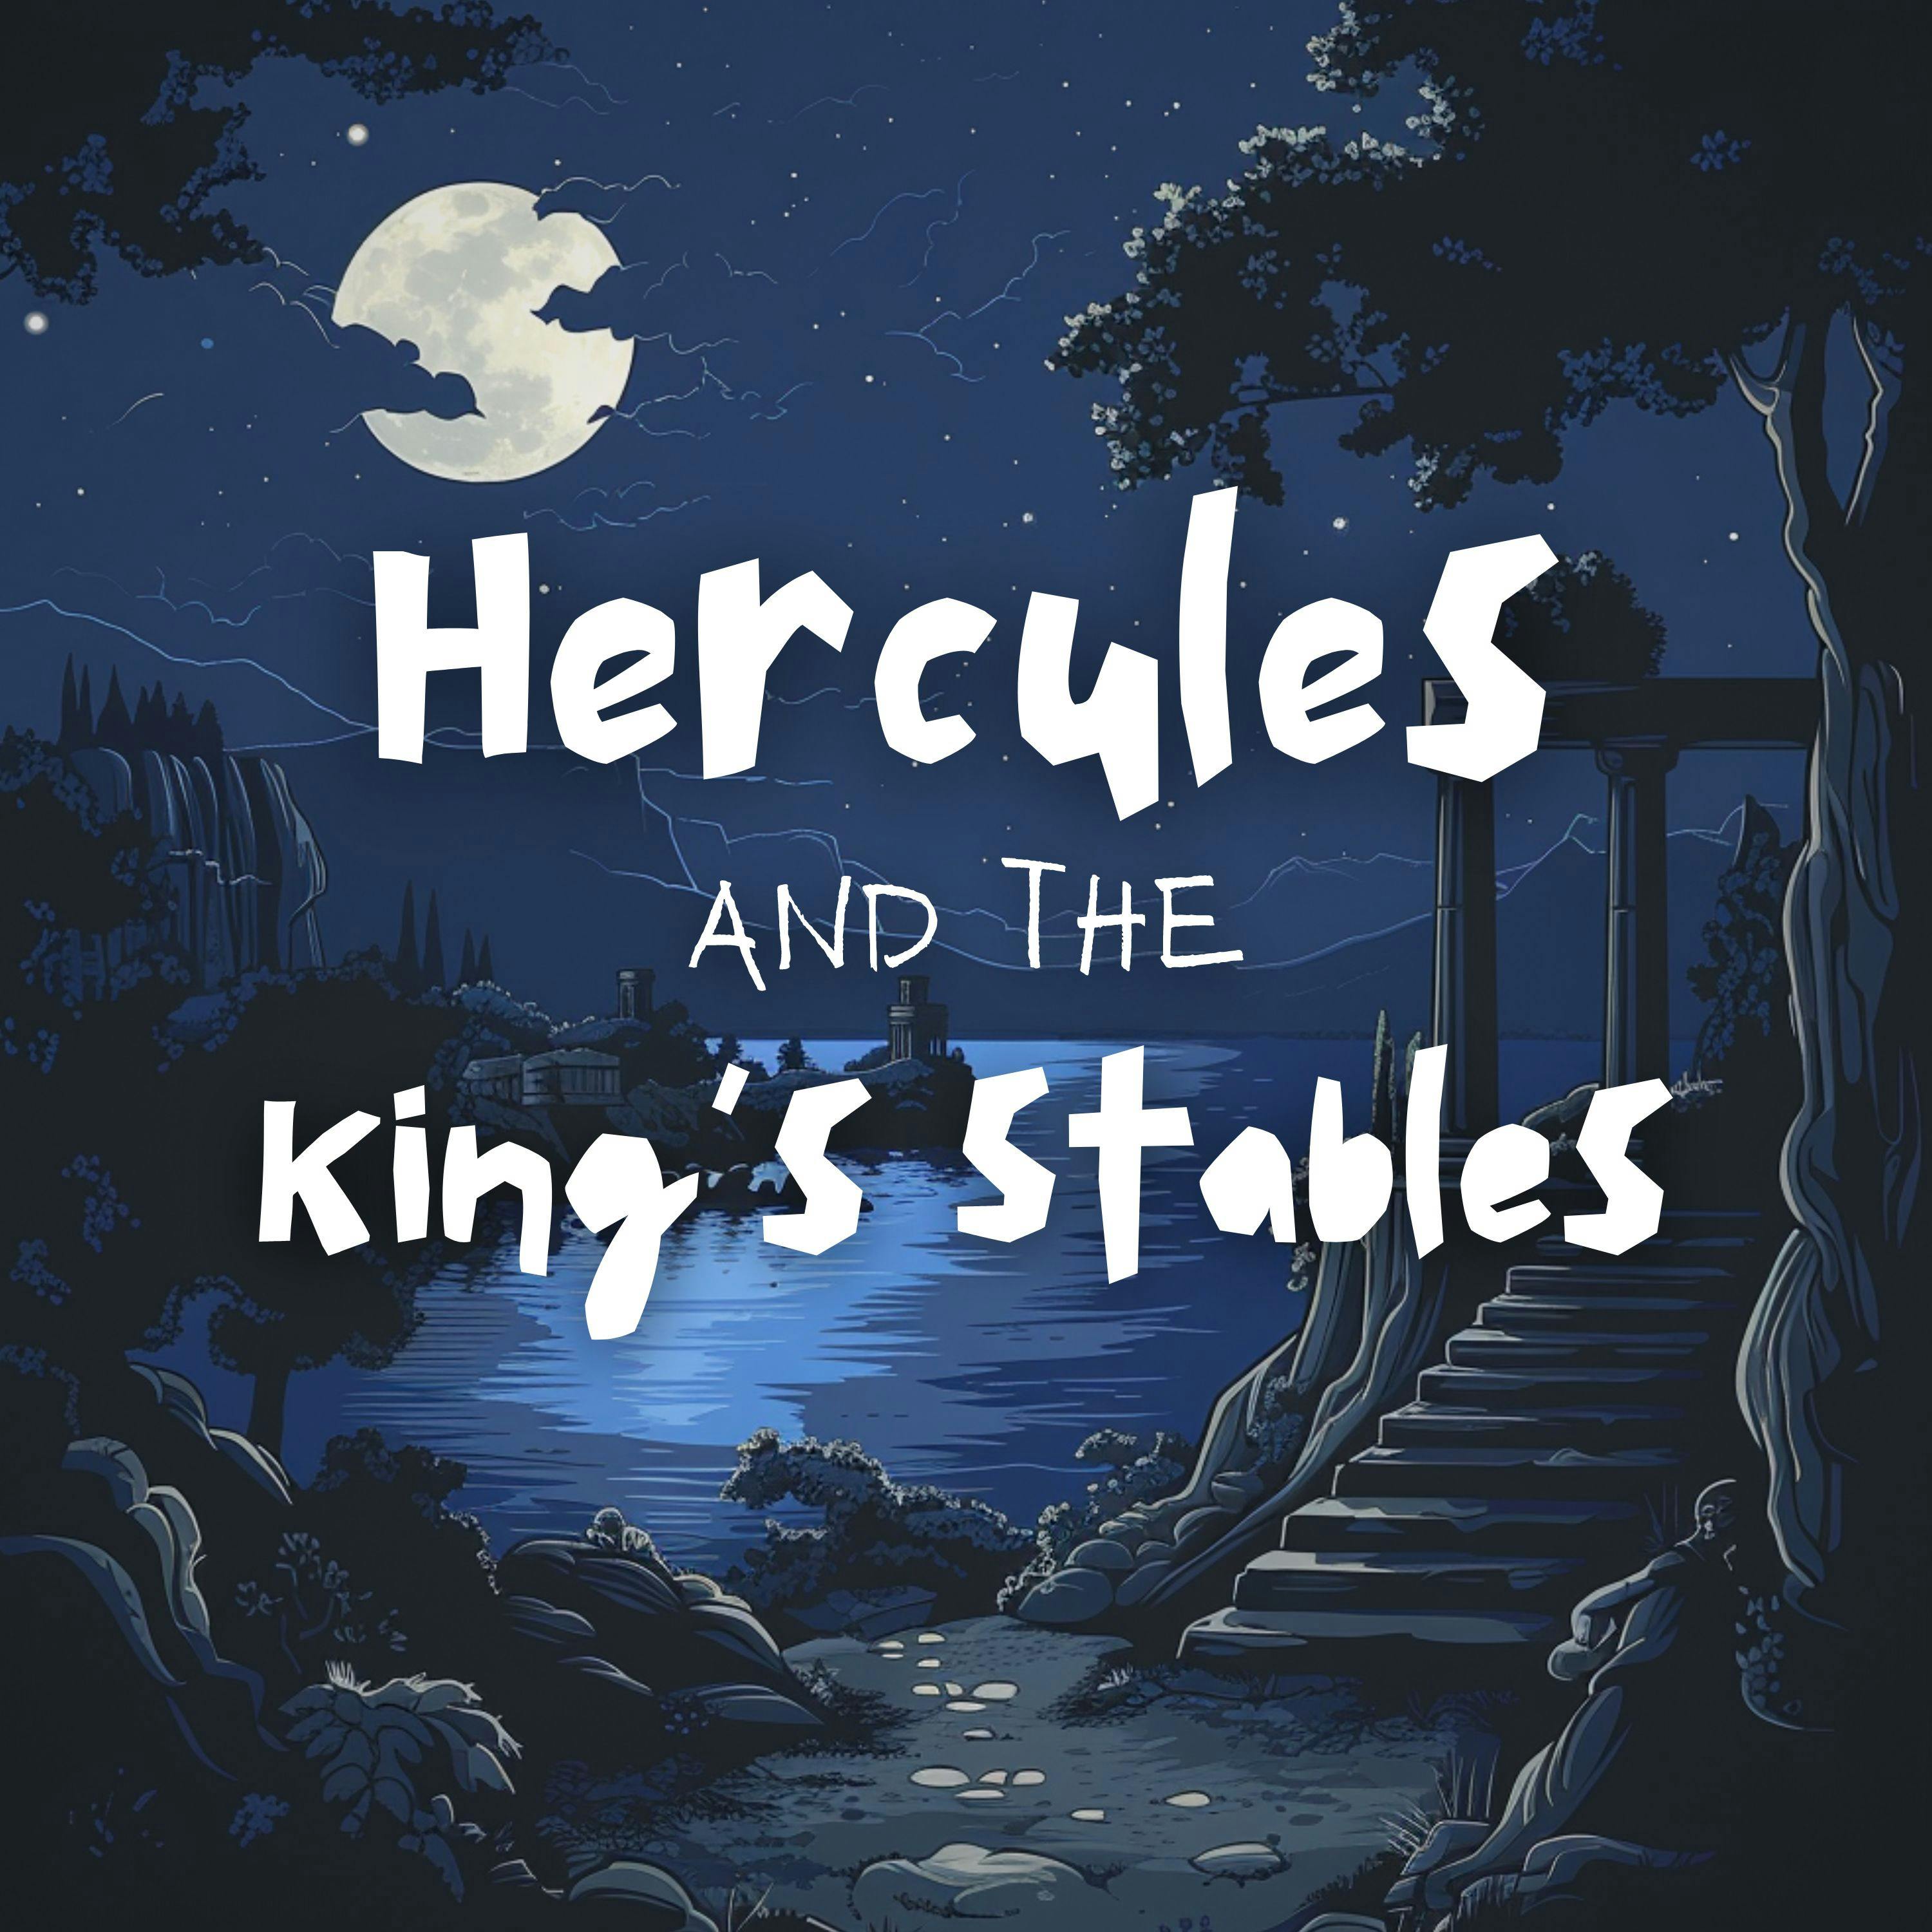 Hercules and the King’s Stables